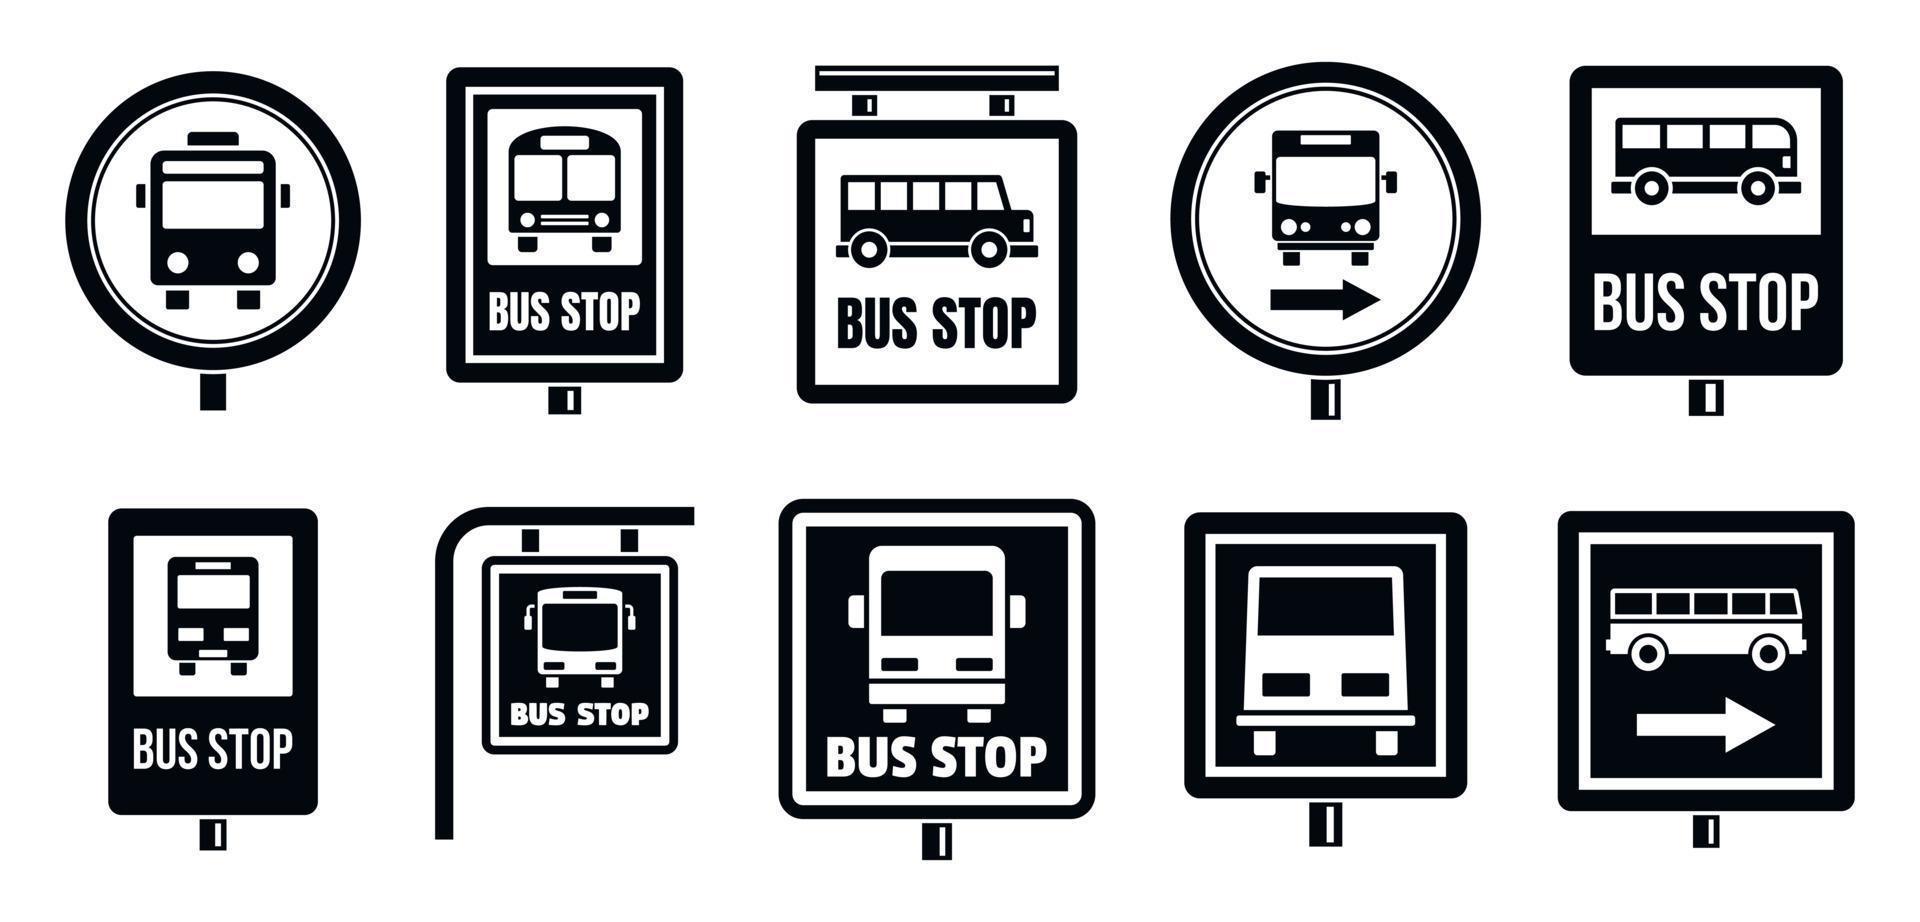 Bus stop sign icon set, simple style vector